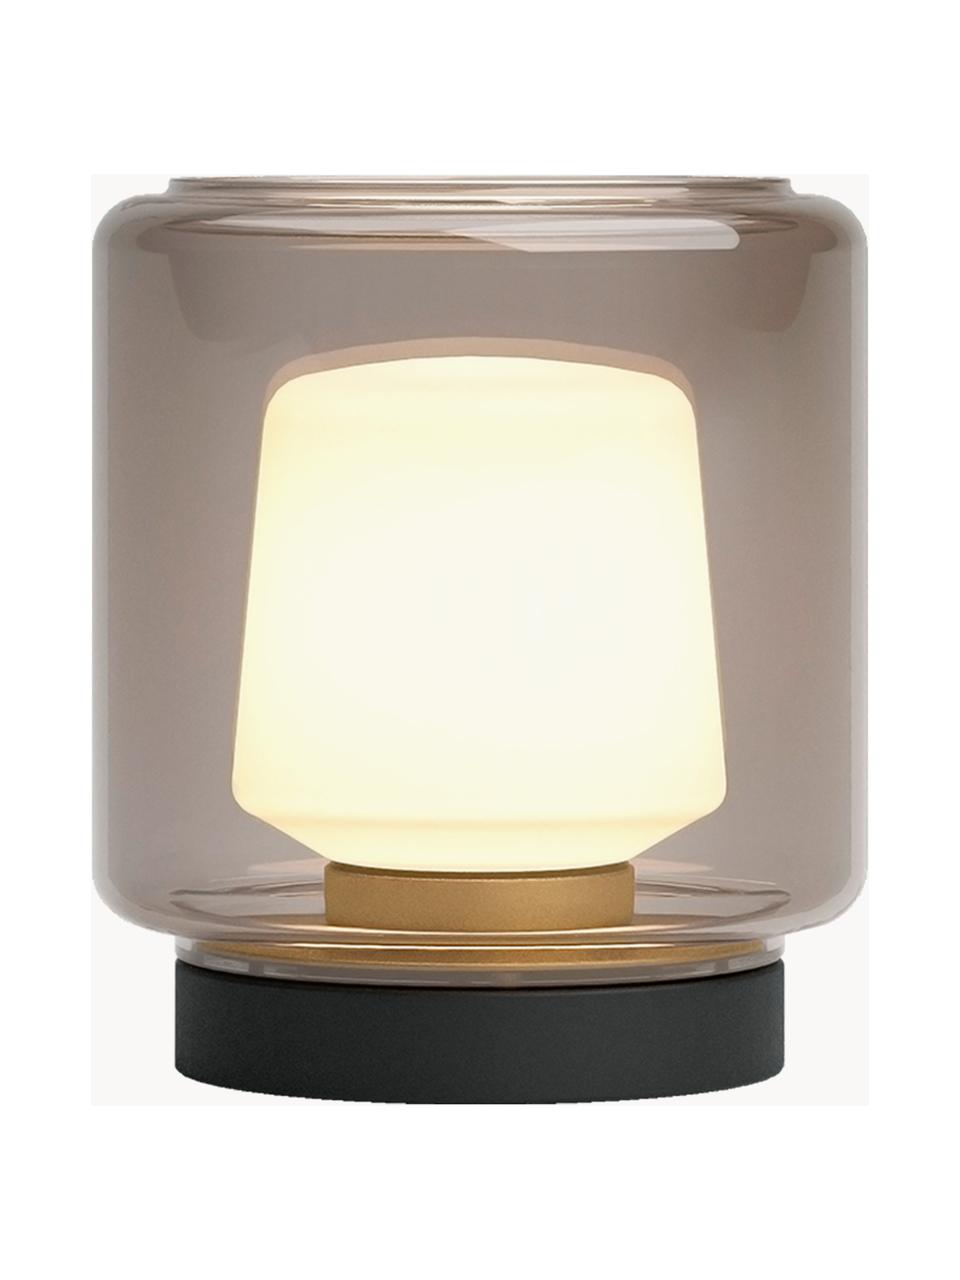 Mobile LED-Outdoor Tischlampe New York, dimmbar, Taupe, Schwarz, Ø 14 x H 17 cm